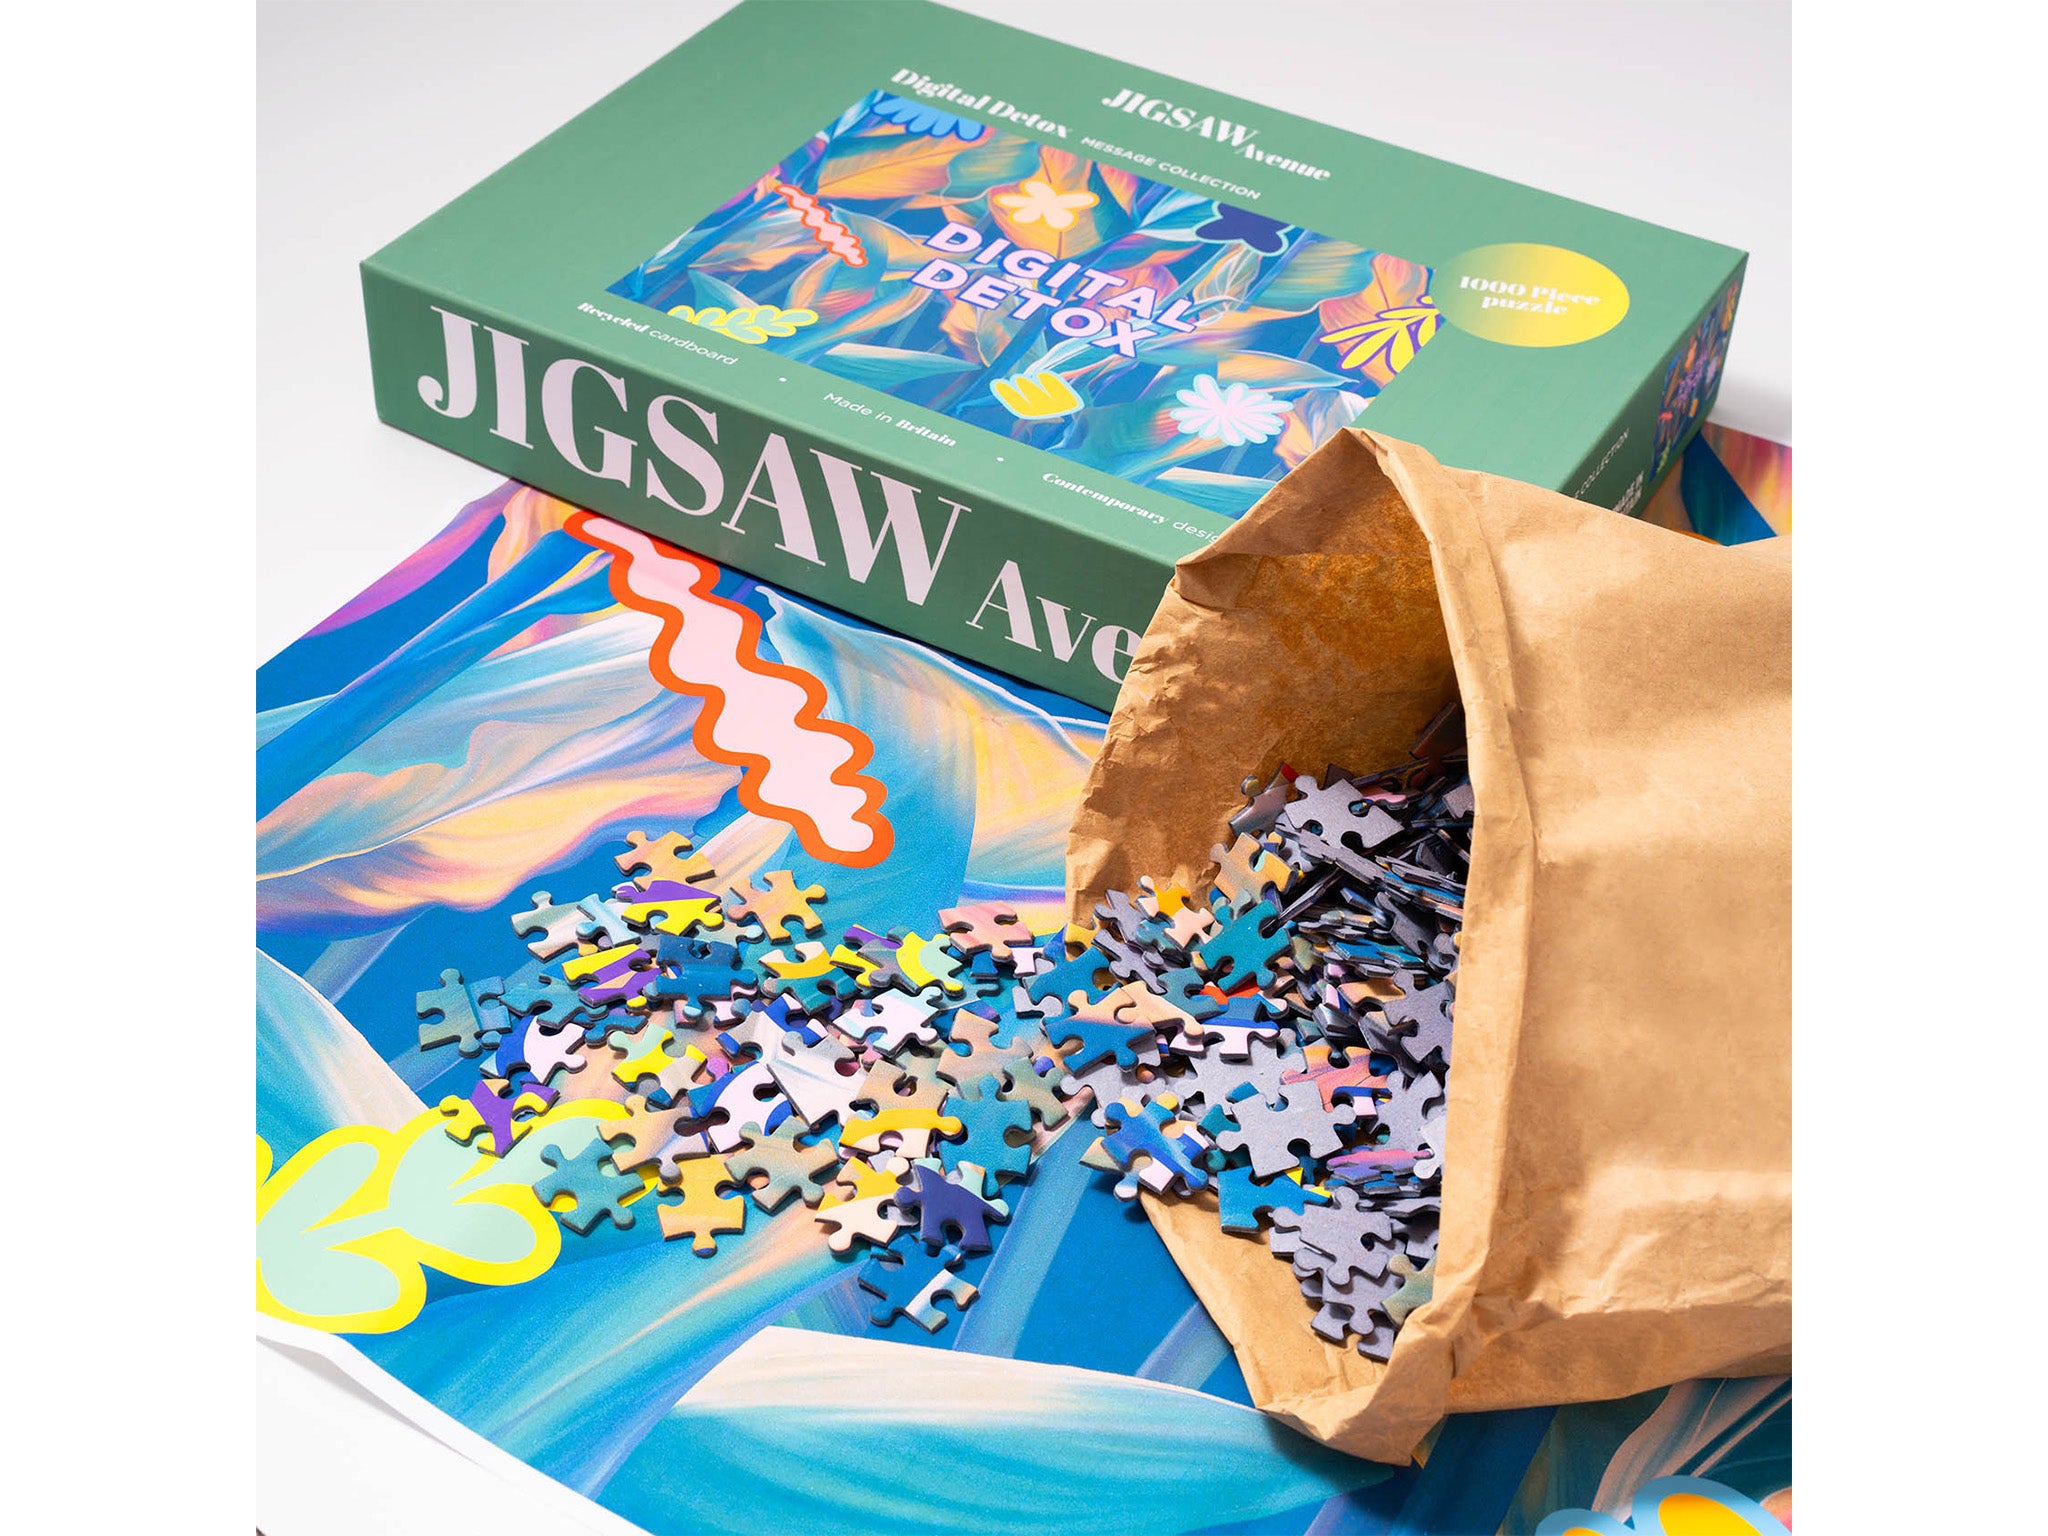 Jigsaw Avenue digital detox flower puzzle collection, 1000 piece puzzle for adults indybest.jpg